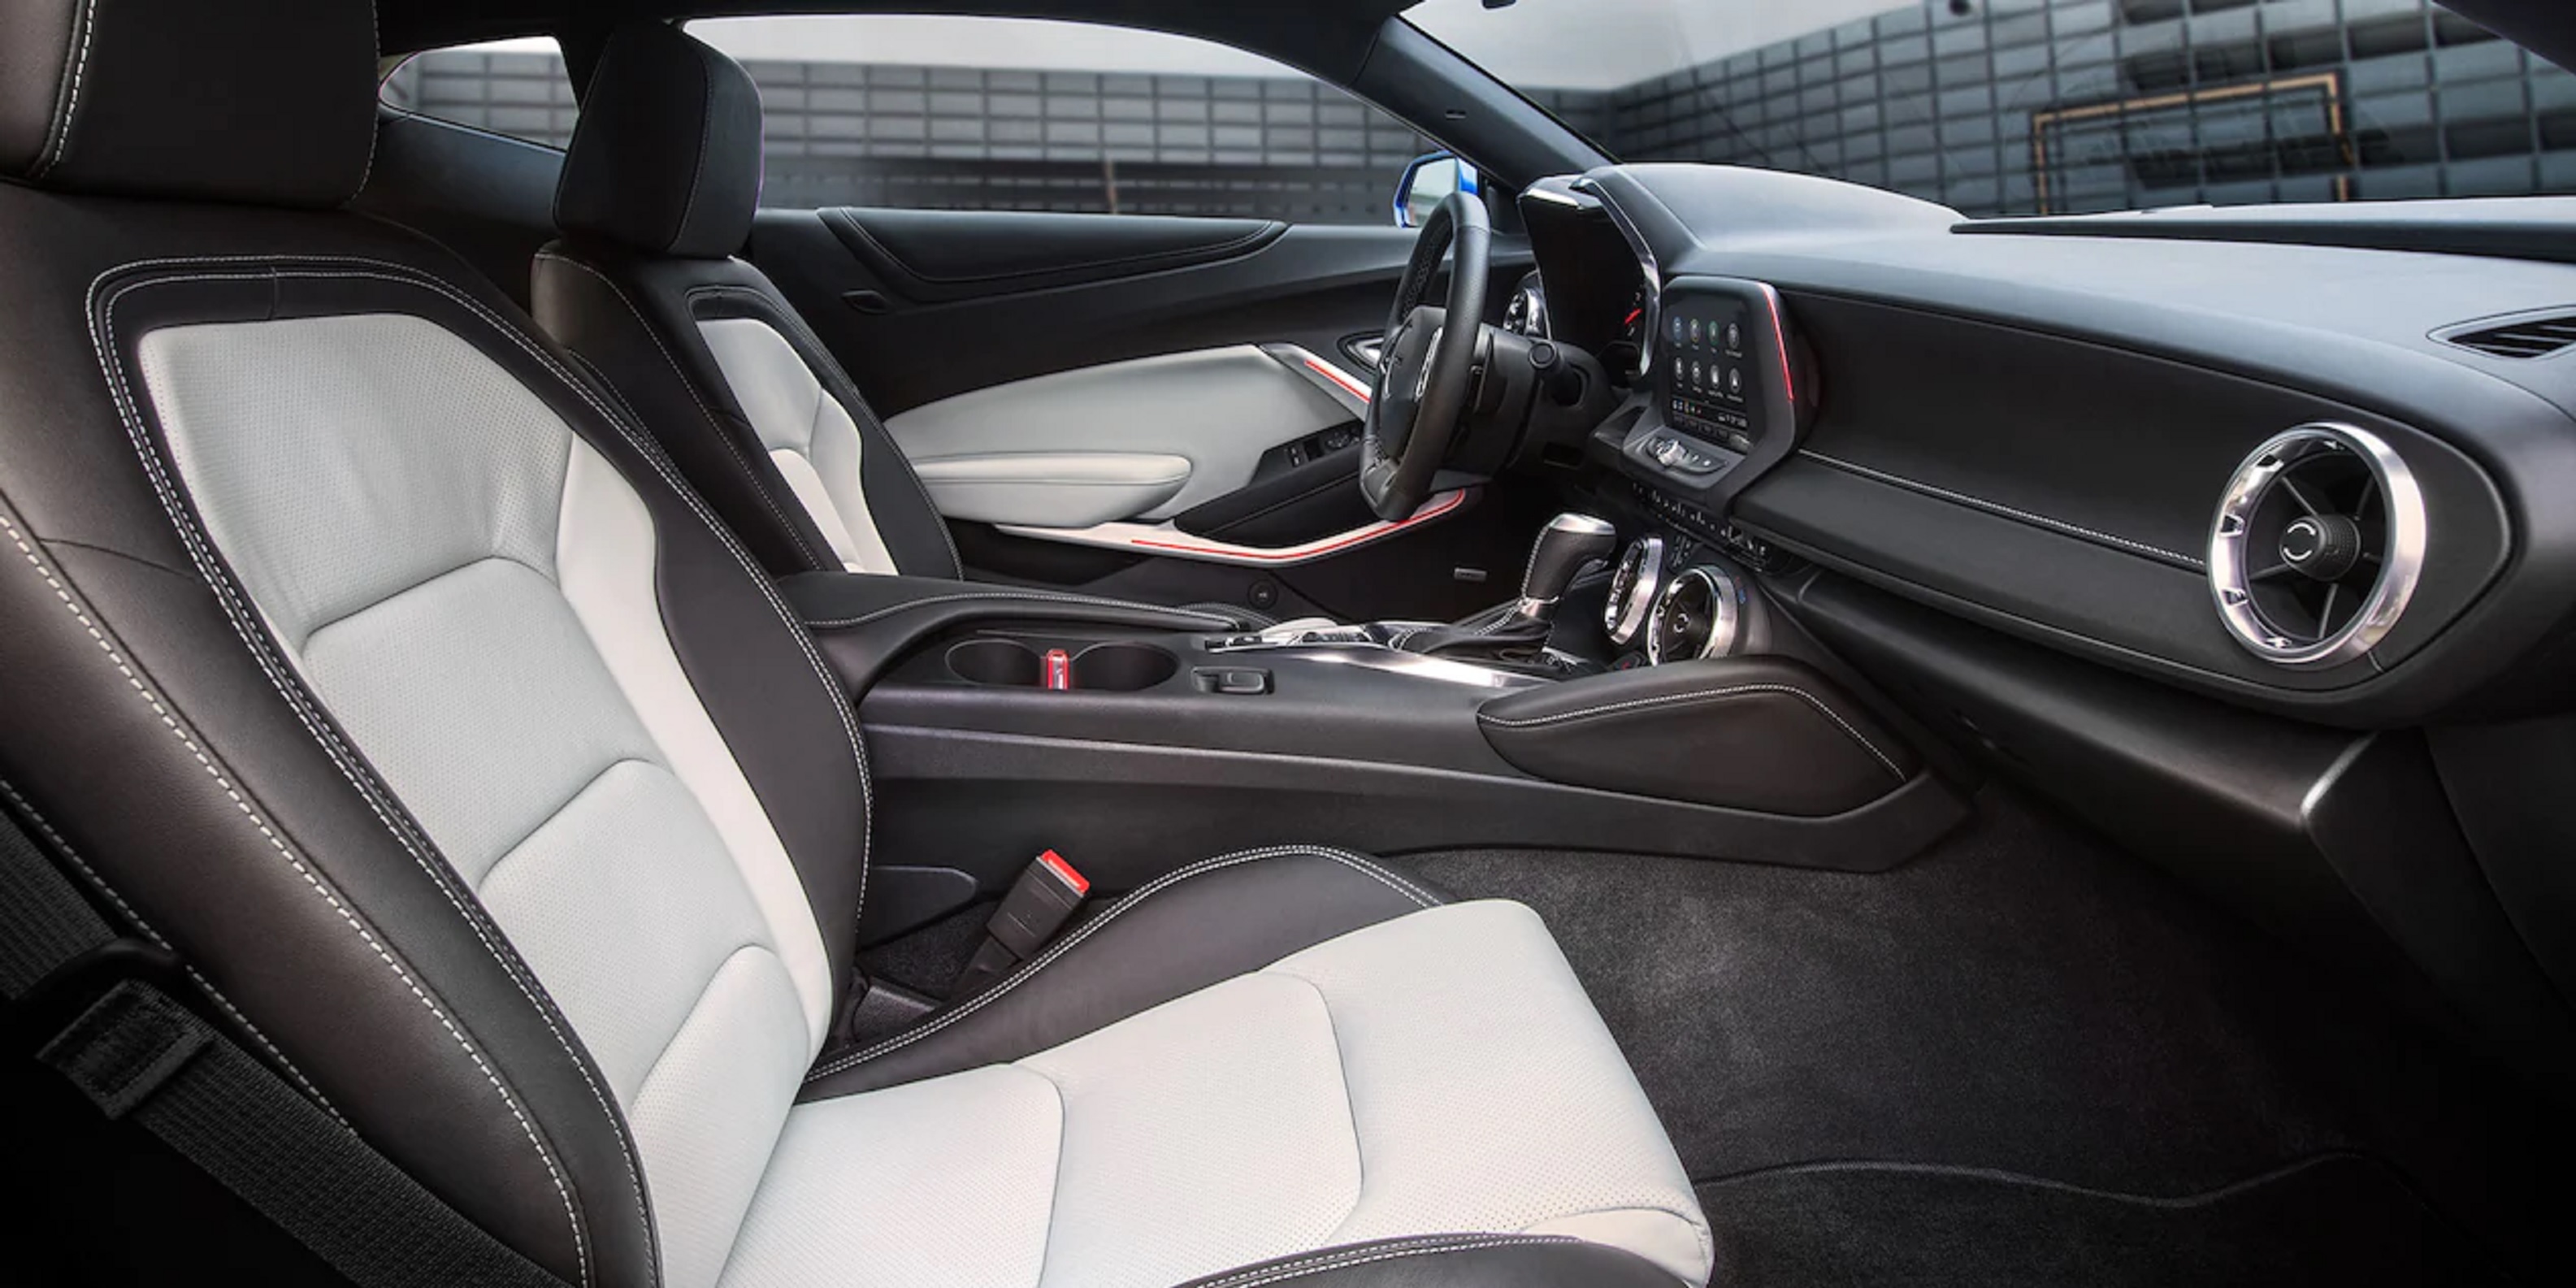 The black-and-white front seats and dashboard of a 2022 Chevrolet Camaro seen from the side